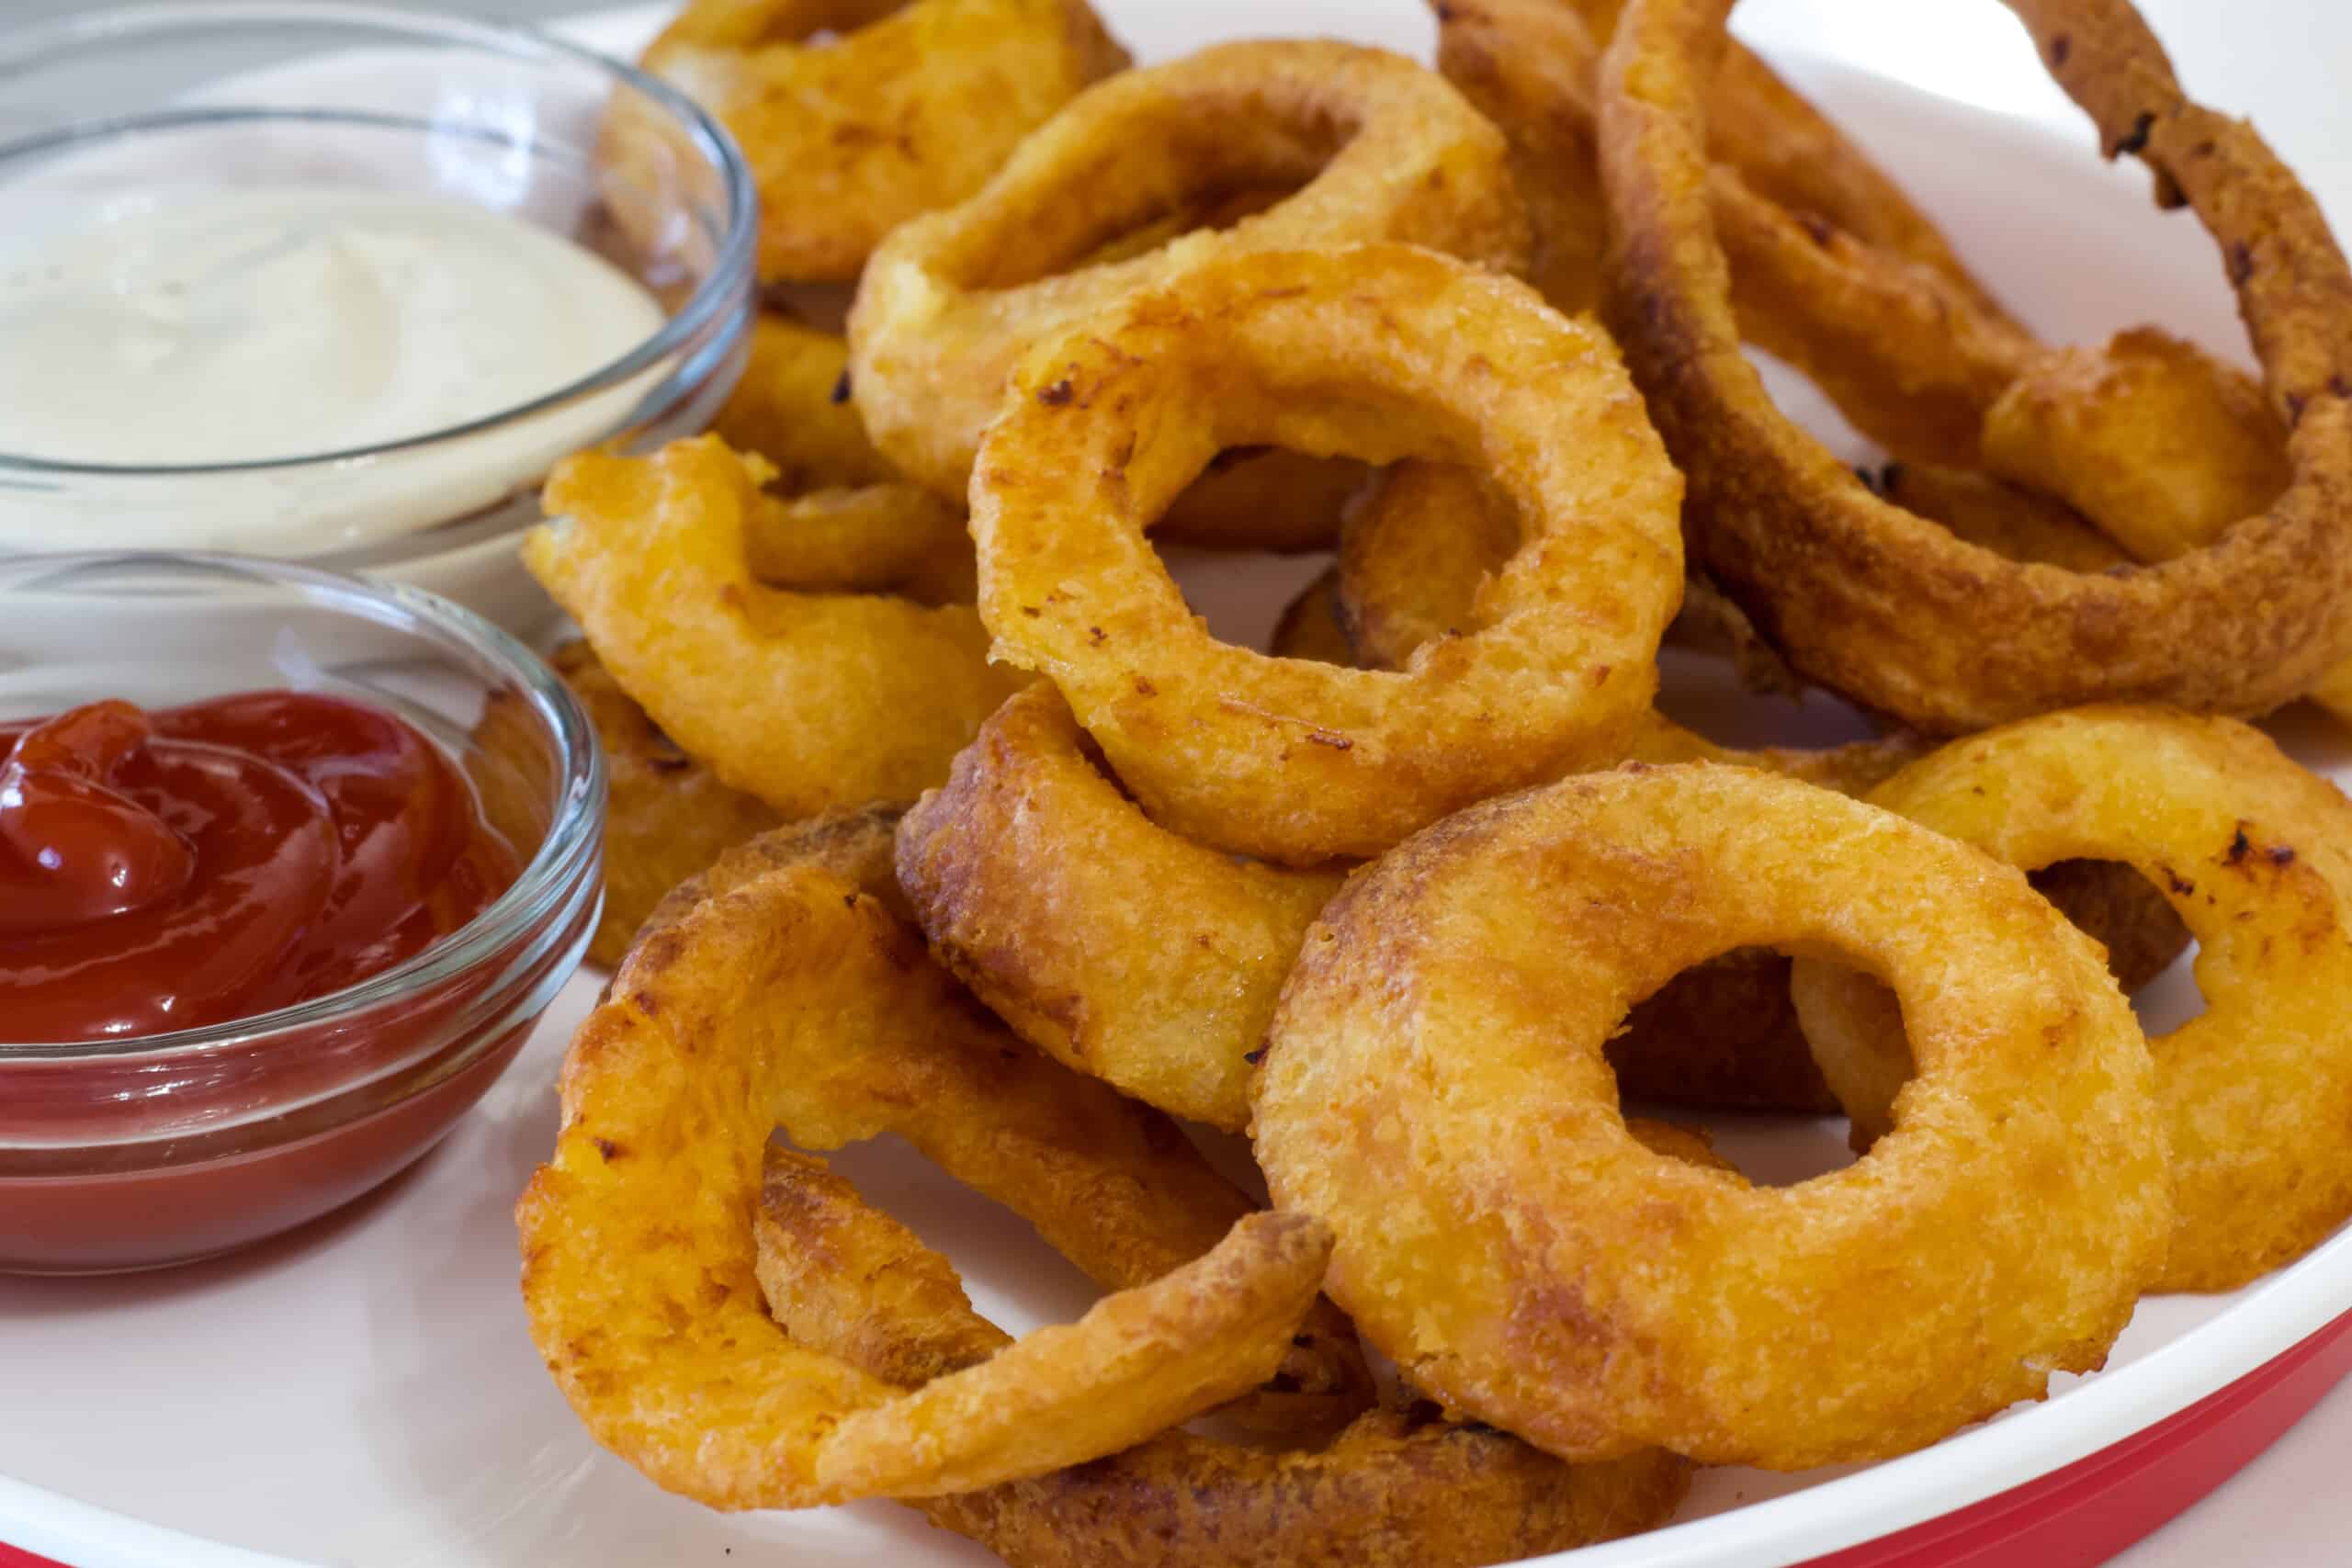 Very close shot of the air fried onion rings on plate with a small bowl of ketchup and ranch dressing sitting next to them.